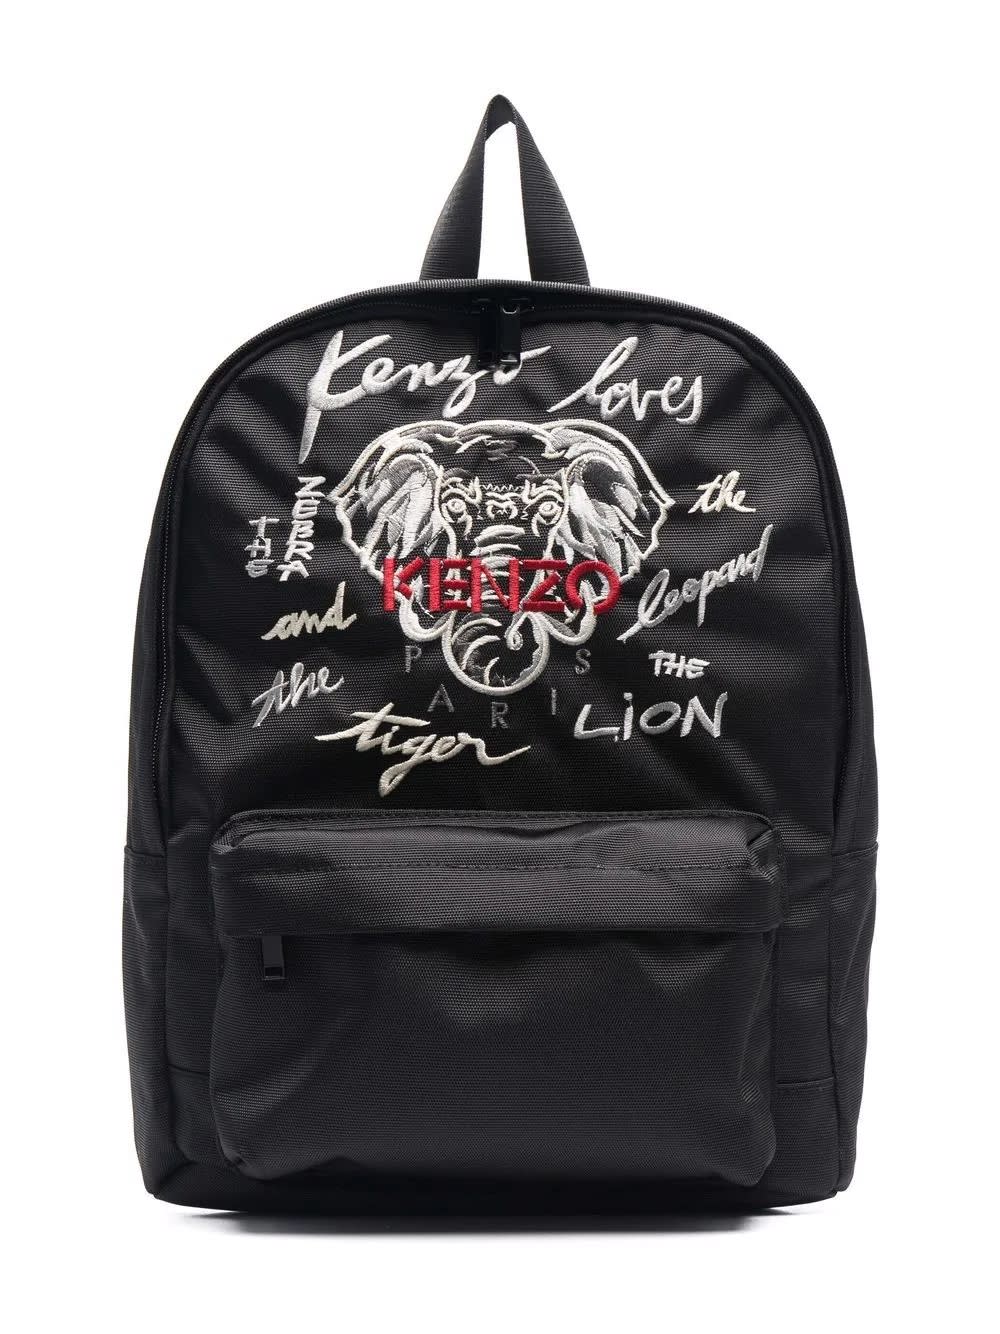 Kenzo Kids Black Backpack With Embroidery